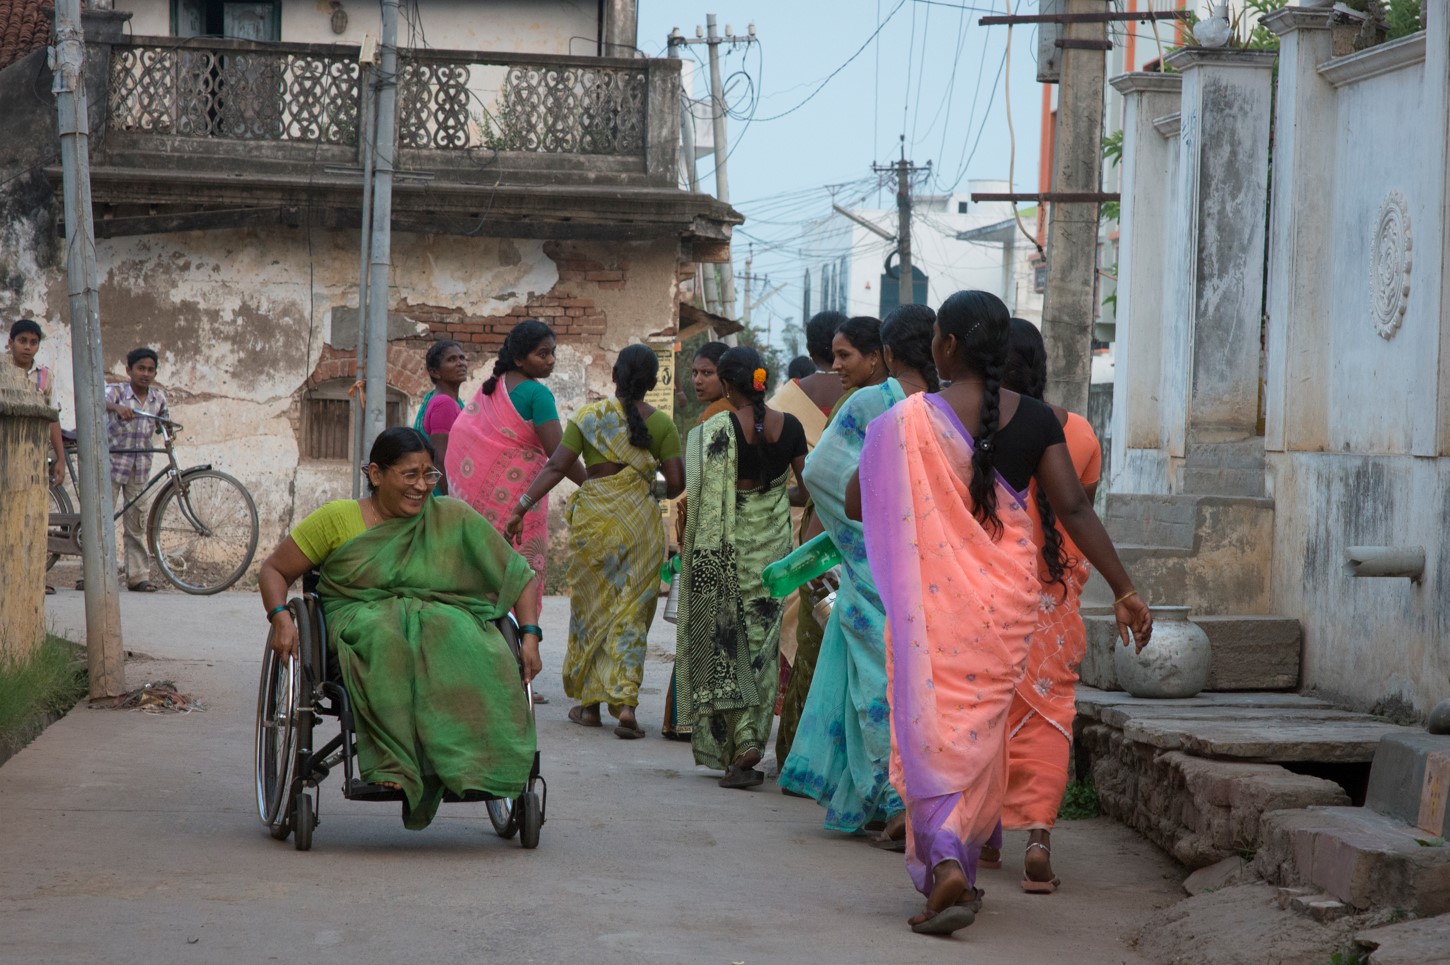 A smiling woman using a wheelchair rolling next to a group of women walking